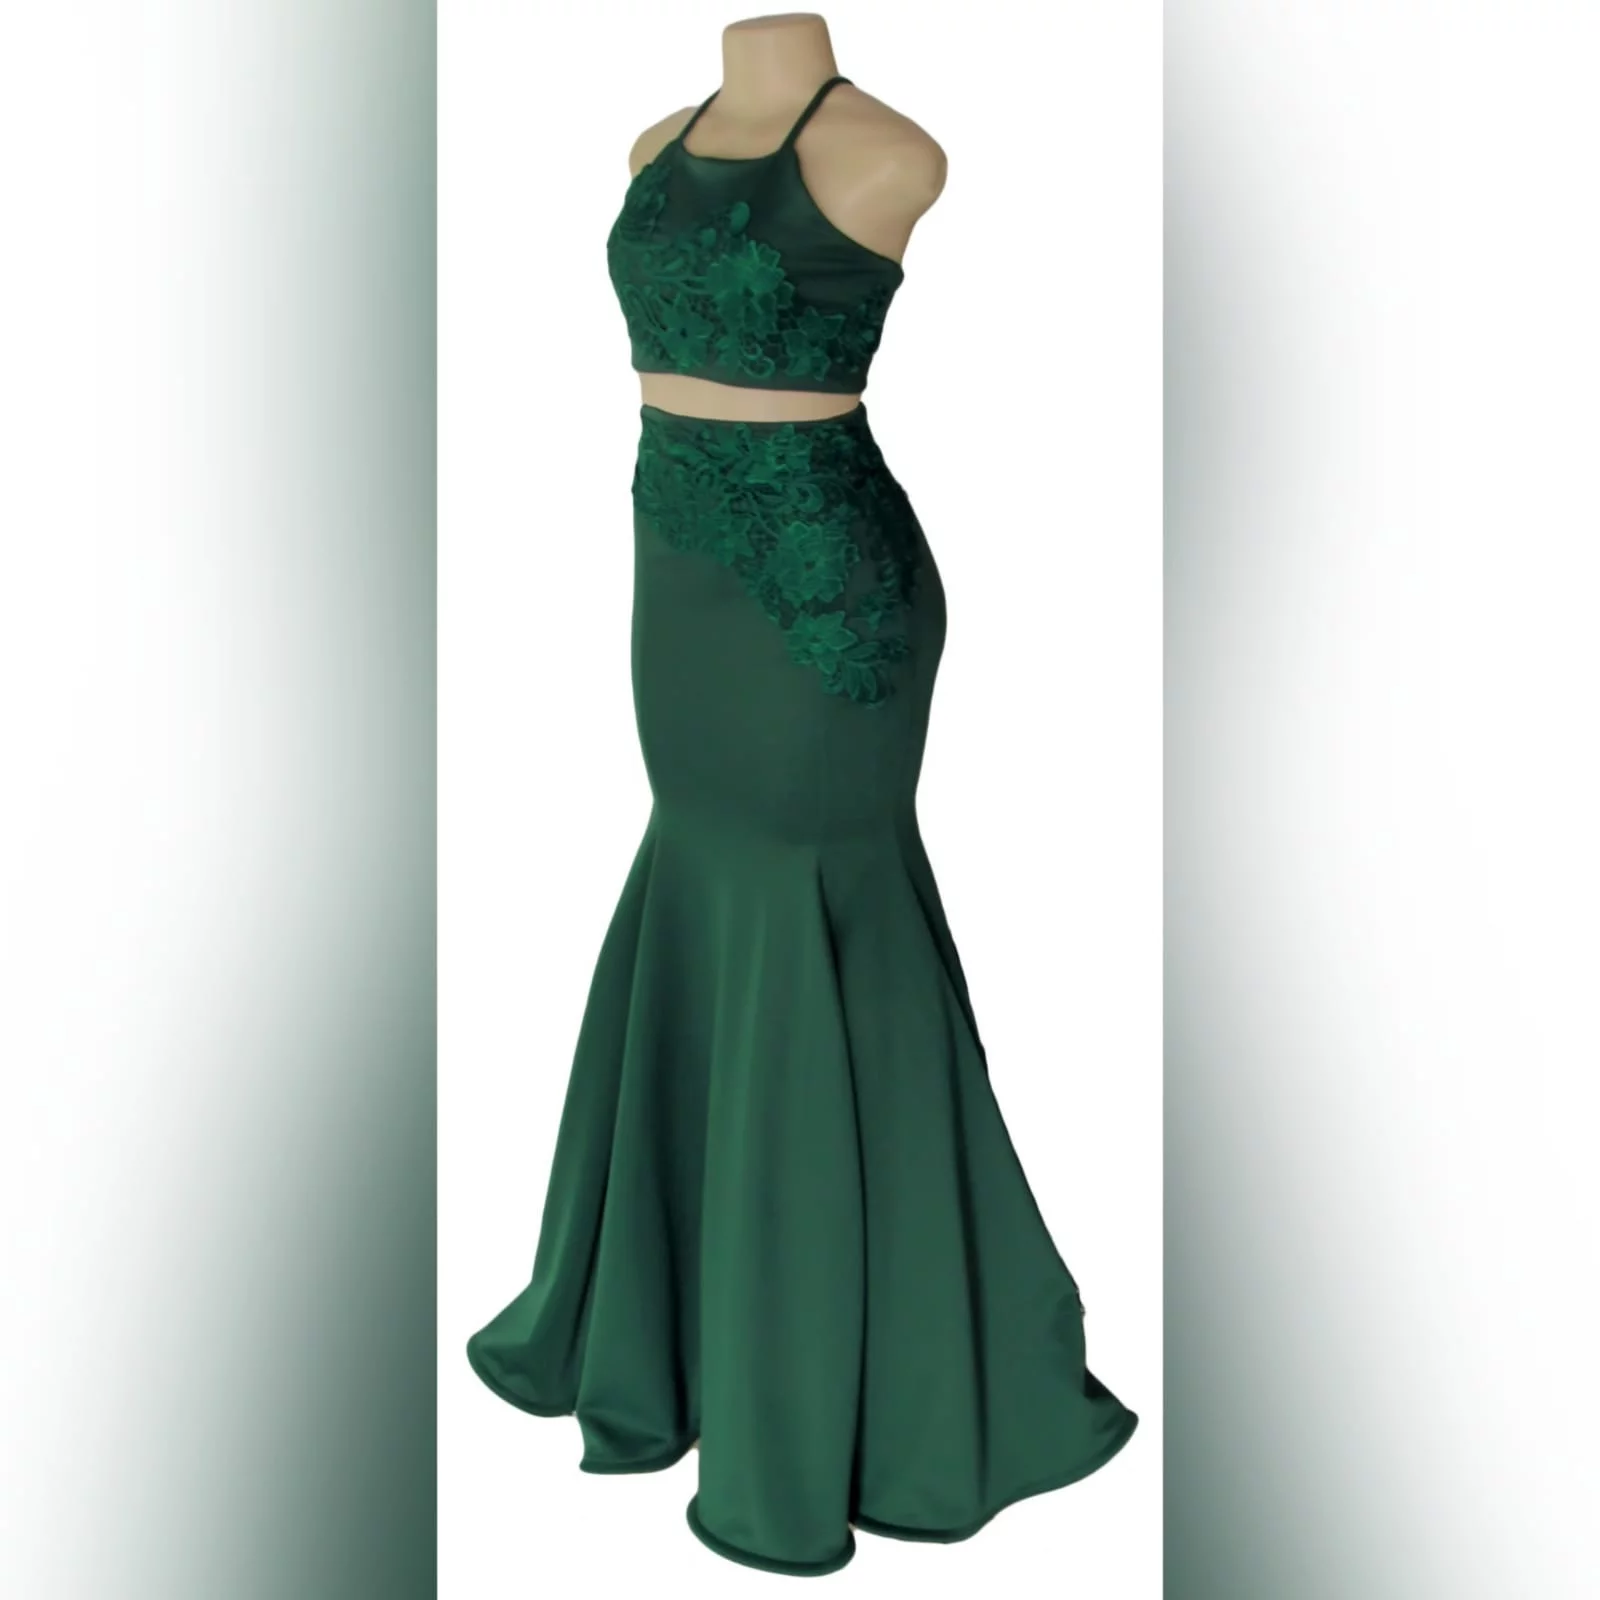 2 piece emerald green mermaid prom dress 8 2 piece emerald green mermaid prom dress. A gorgeous crop top with a lace-up open back, with a mermaid skirt. Lace detail on skirt and top for a classic touch.